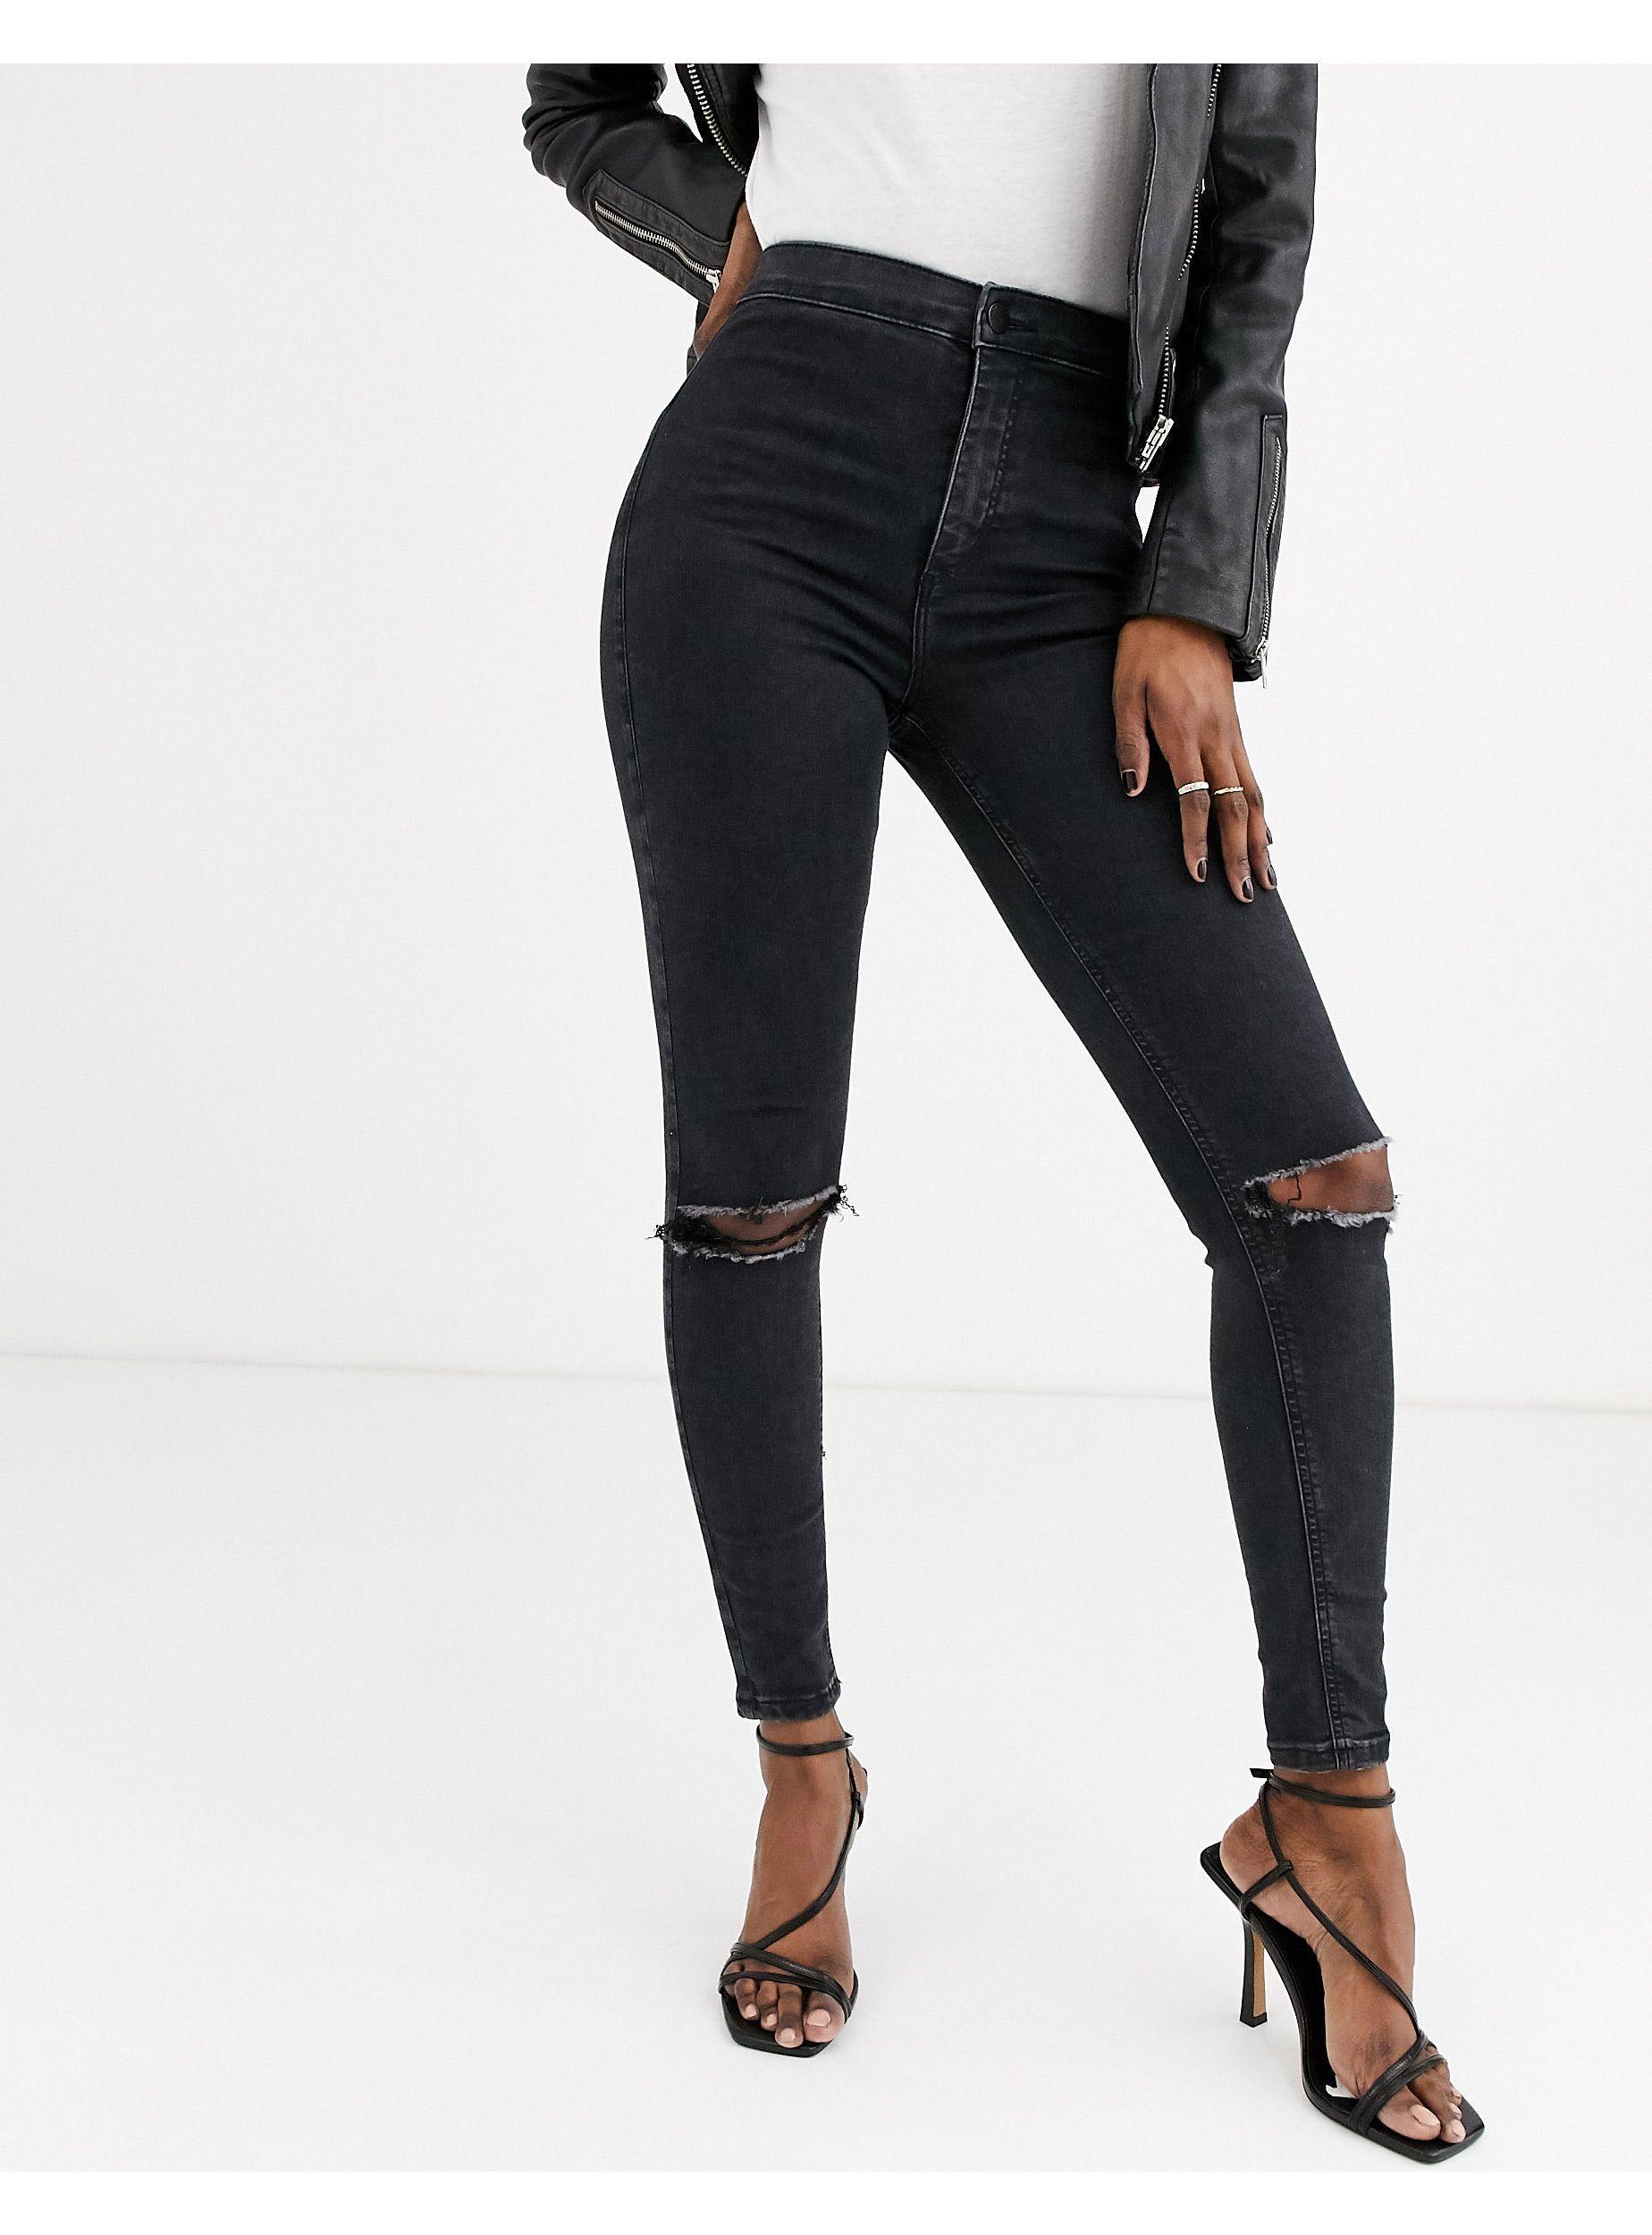 humane Syd Bore TOPSHOP Joni Skinny Jeans With Rips in Black | Lyst